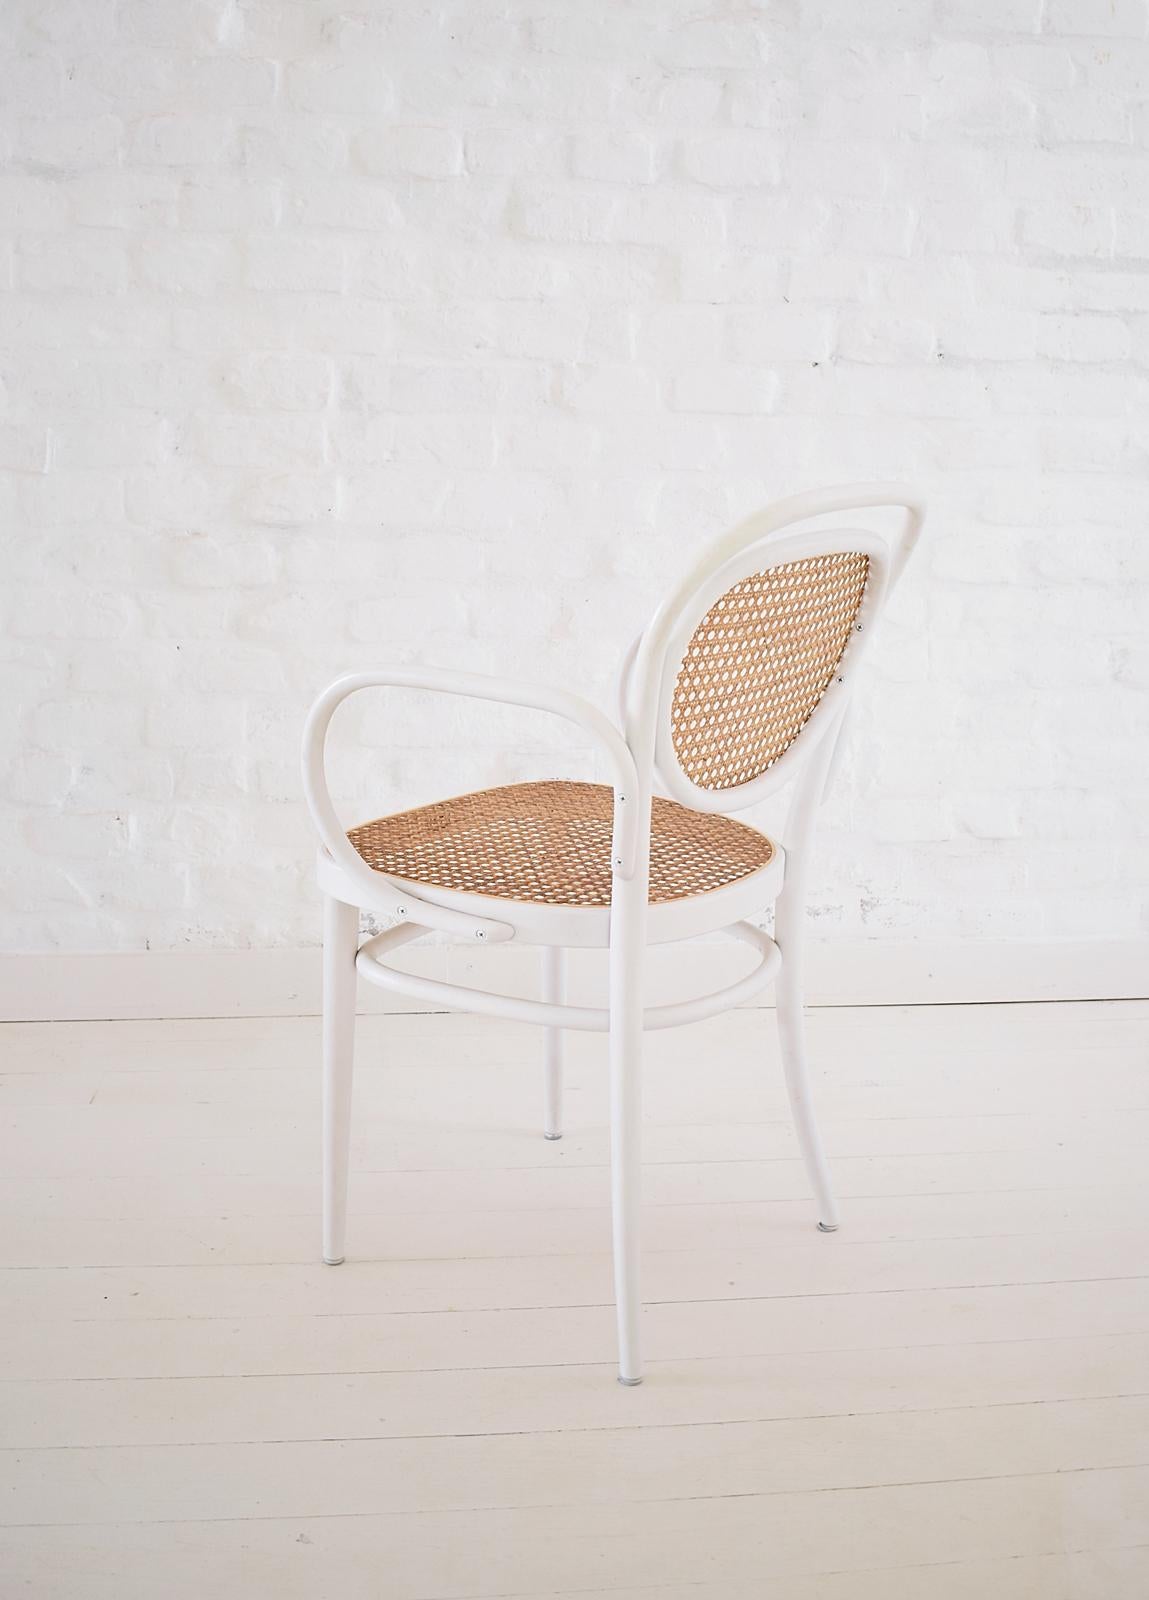 Painted No. 215 Armchair by Michael Thonet for Thonet